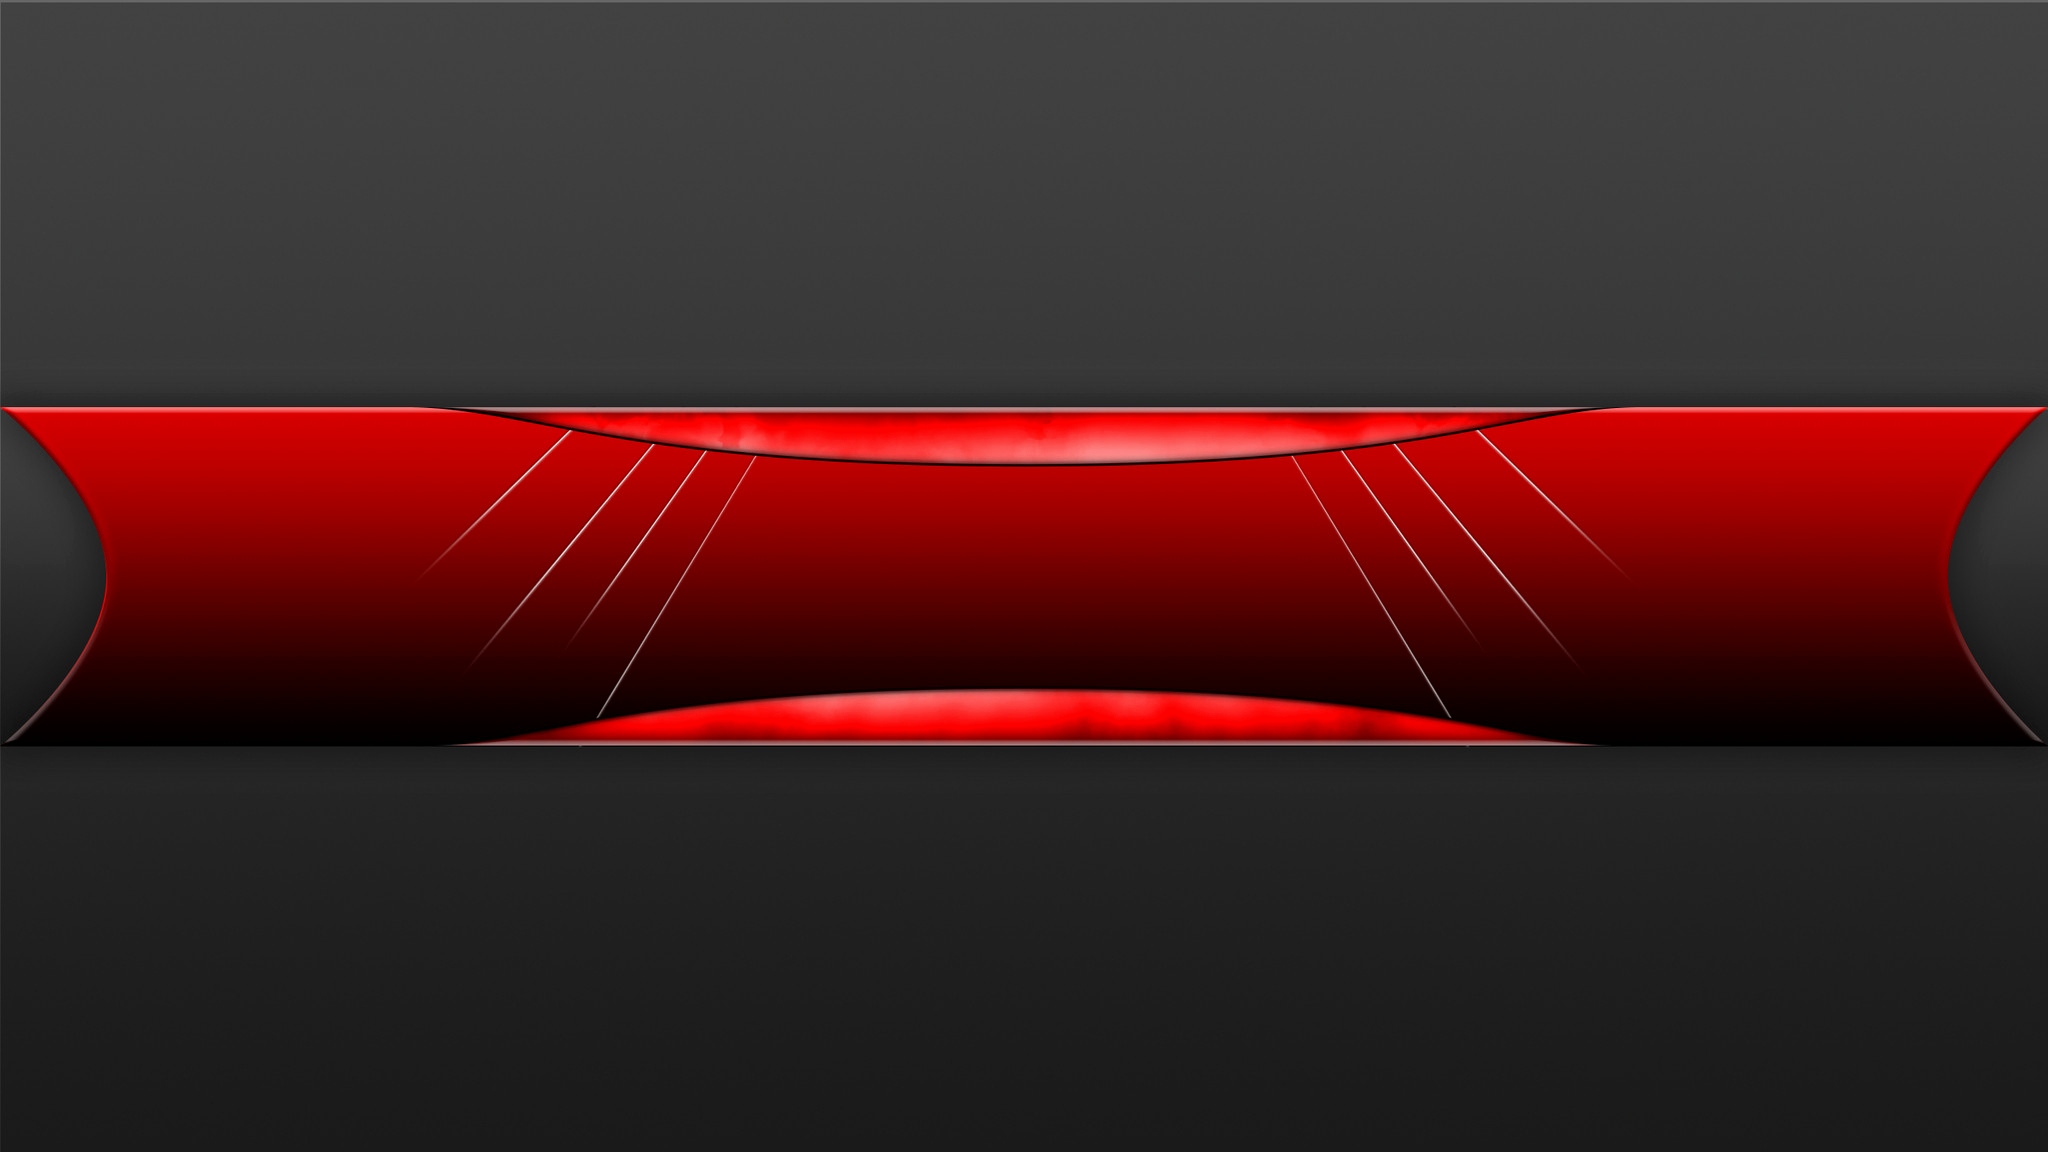 Download Wallpaper Youtube Banner No Text Red Hd Wallpaper Backgrounds Download